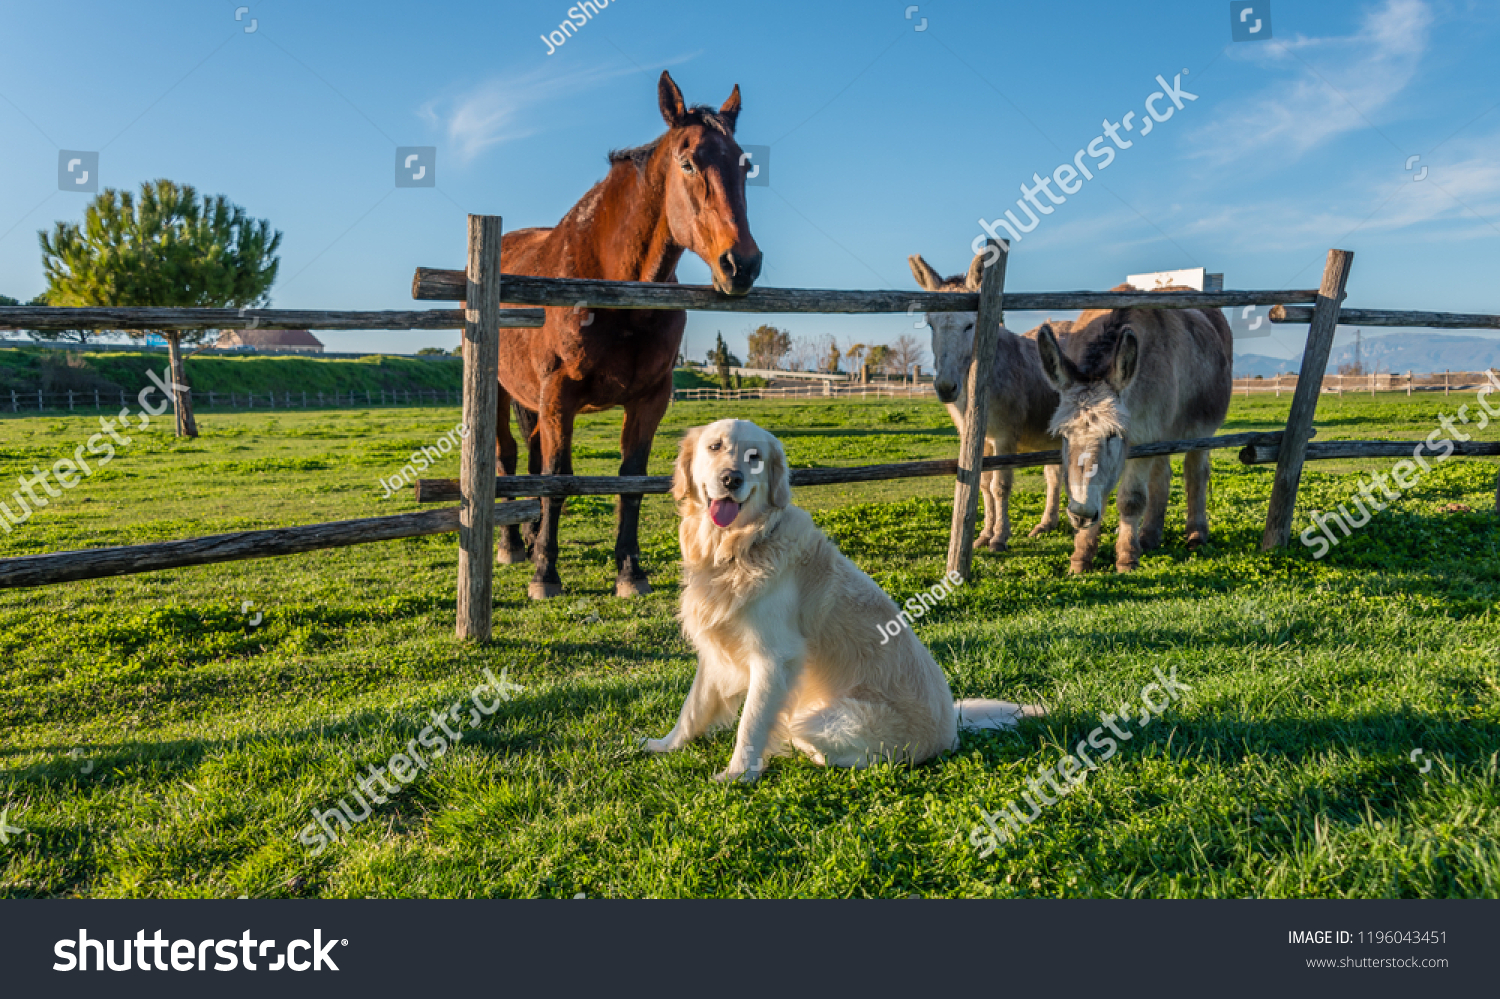 Golden Retriever with Horse and Donkeys #1196043451